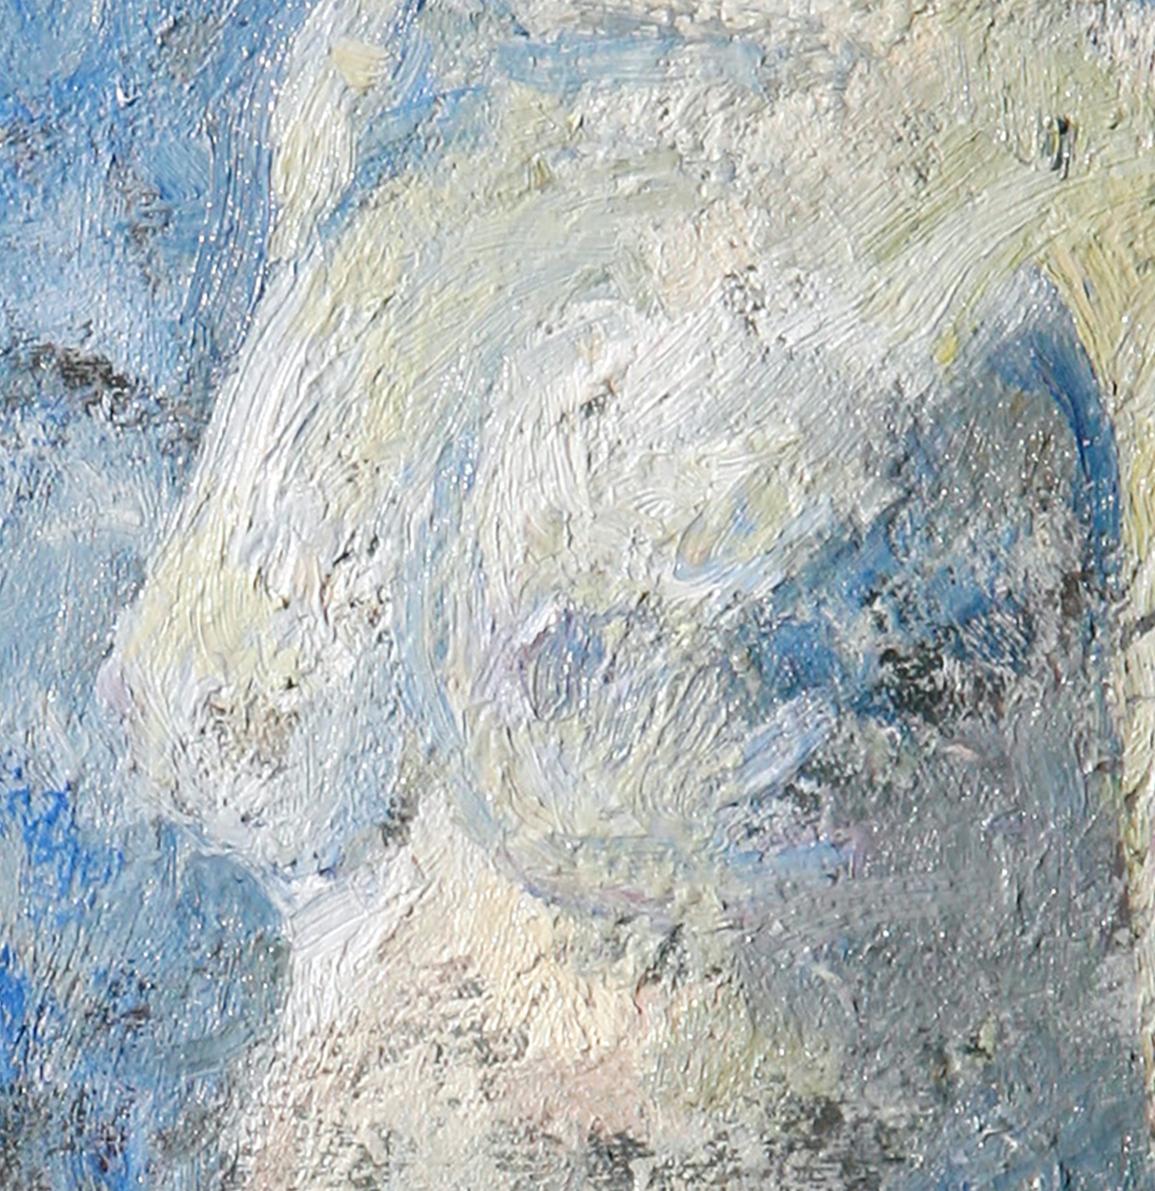 7-11-08 - 21st Century, Contemporary, Nude Painting, Oil on Canvas 5